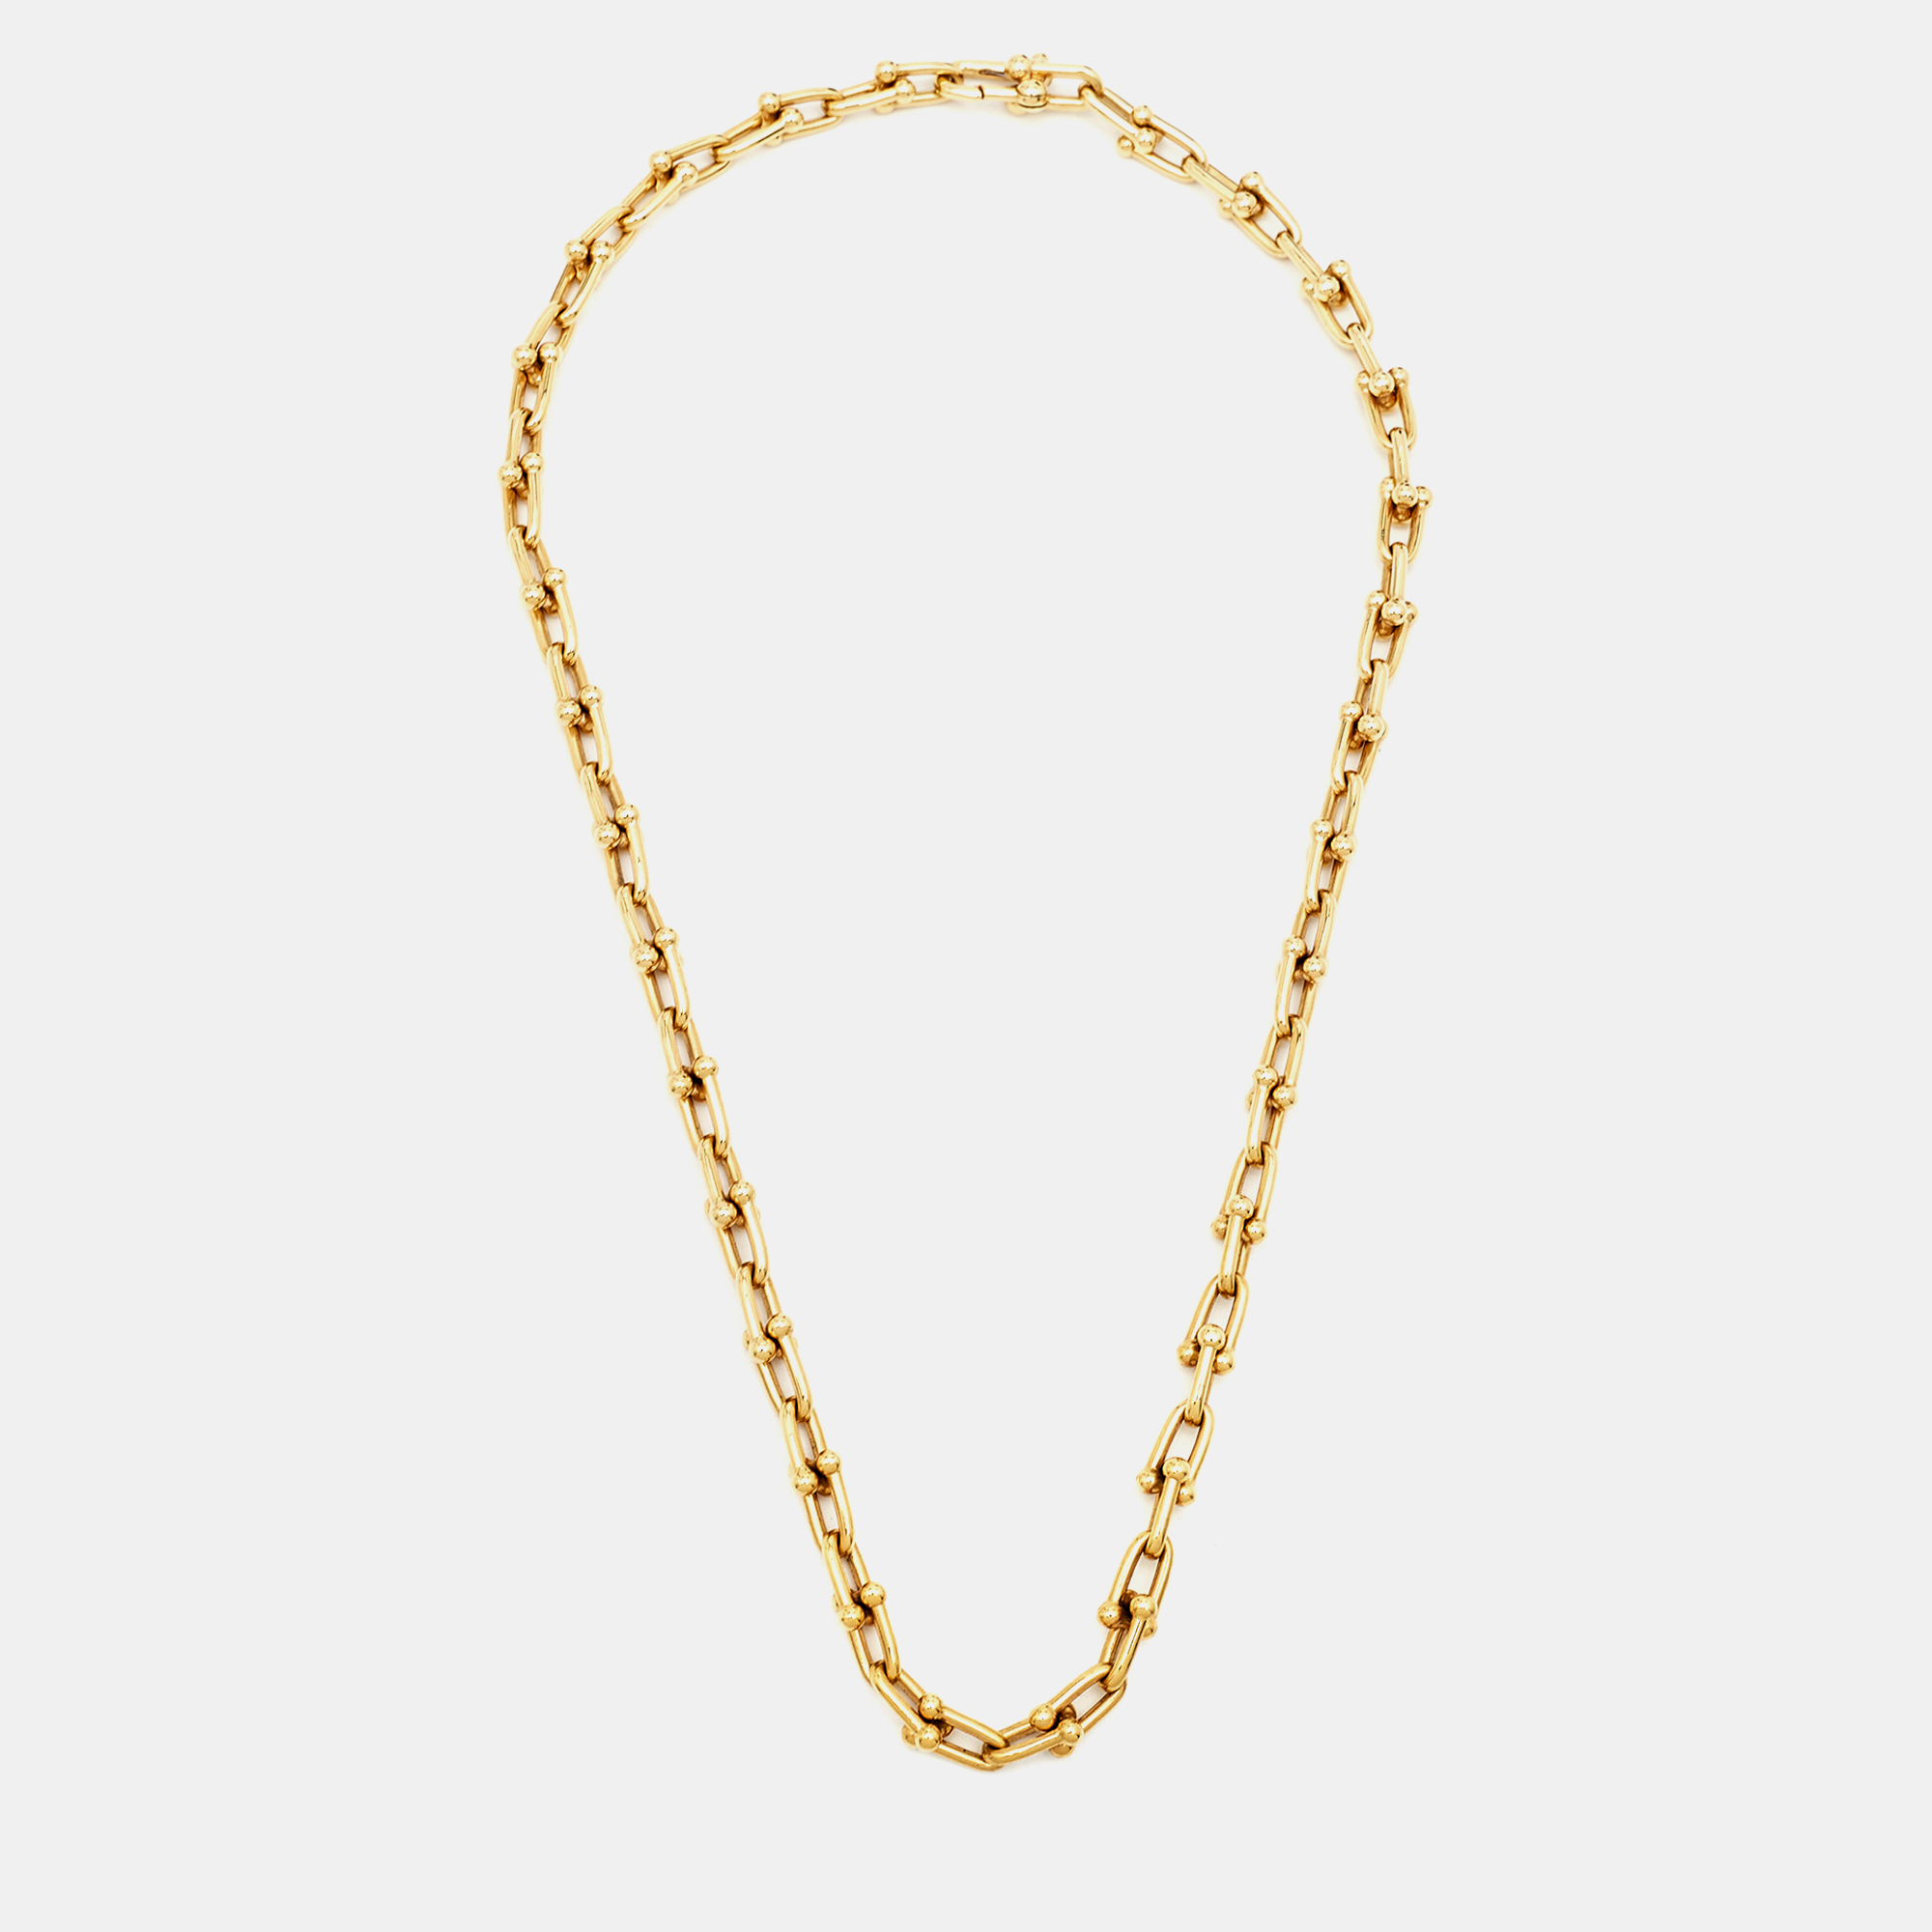 Pre-owned Tiffany & Co Hardwear Medium Link 18k Yellow Gold Necklace